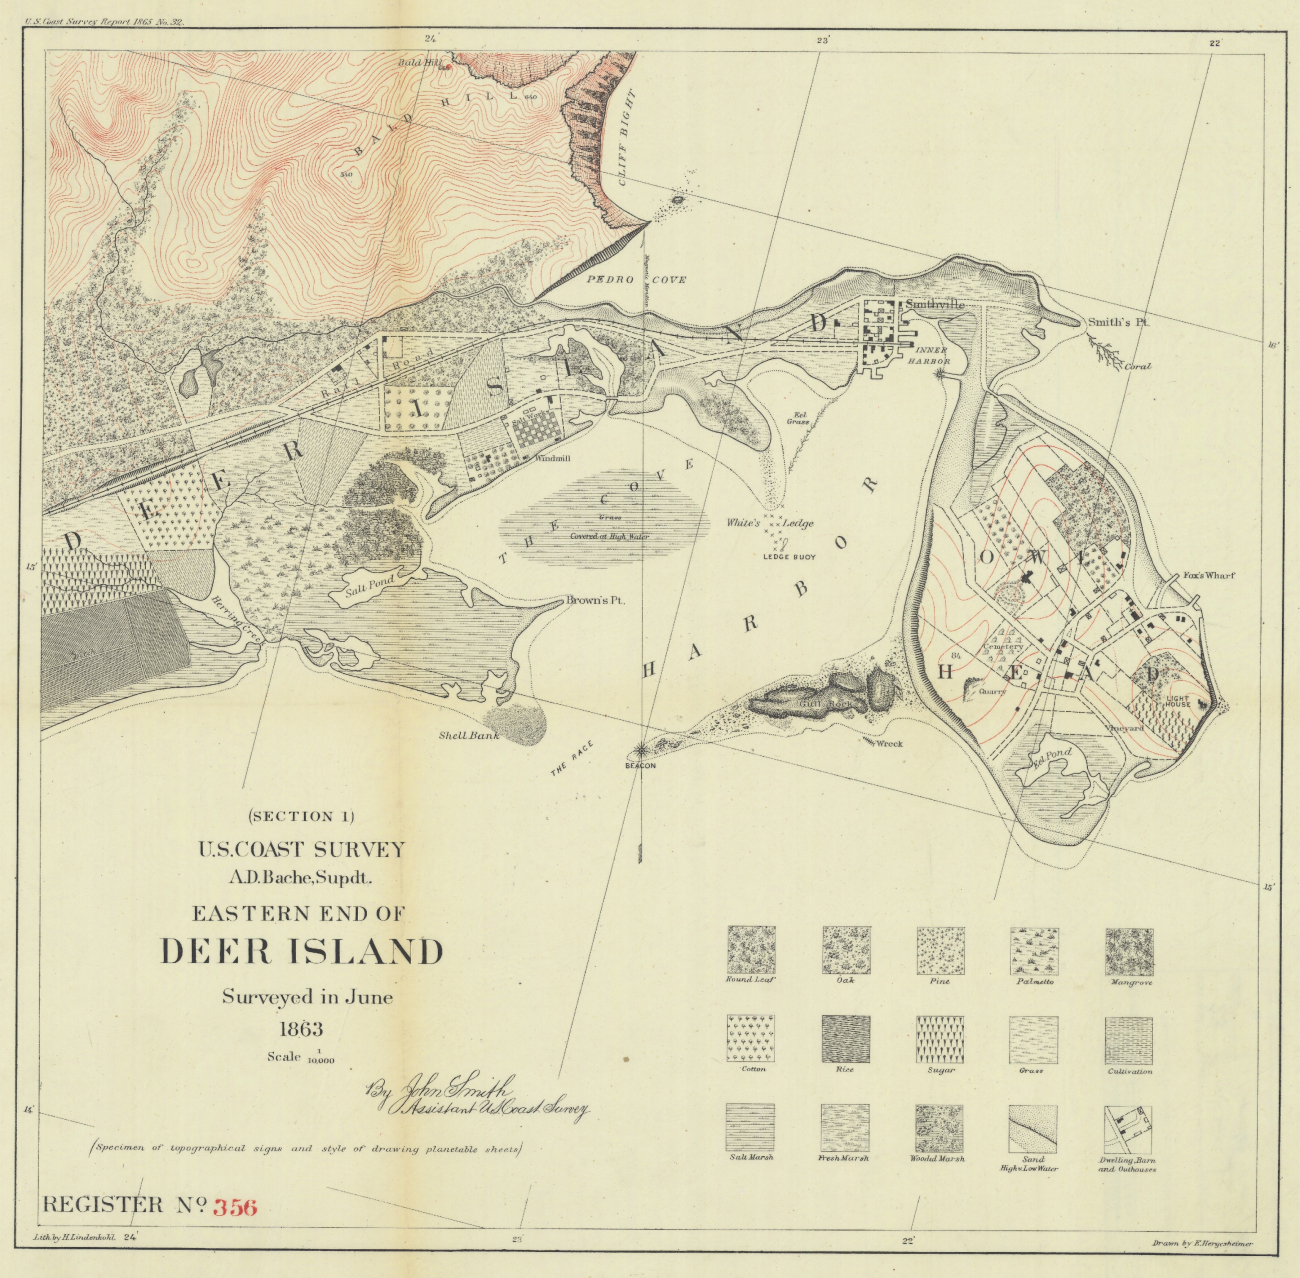 Topographic Survey T-356 of Eastern End of Deer Island, surveyed by John Smith